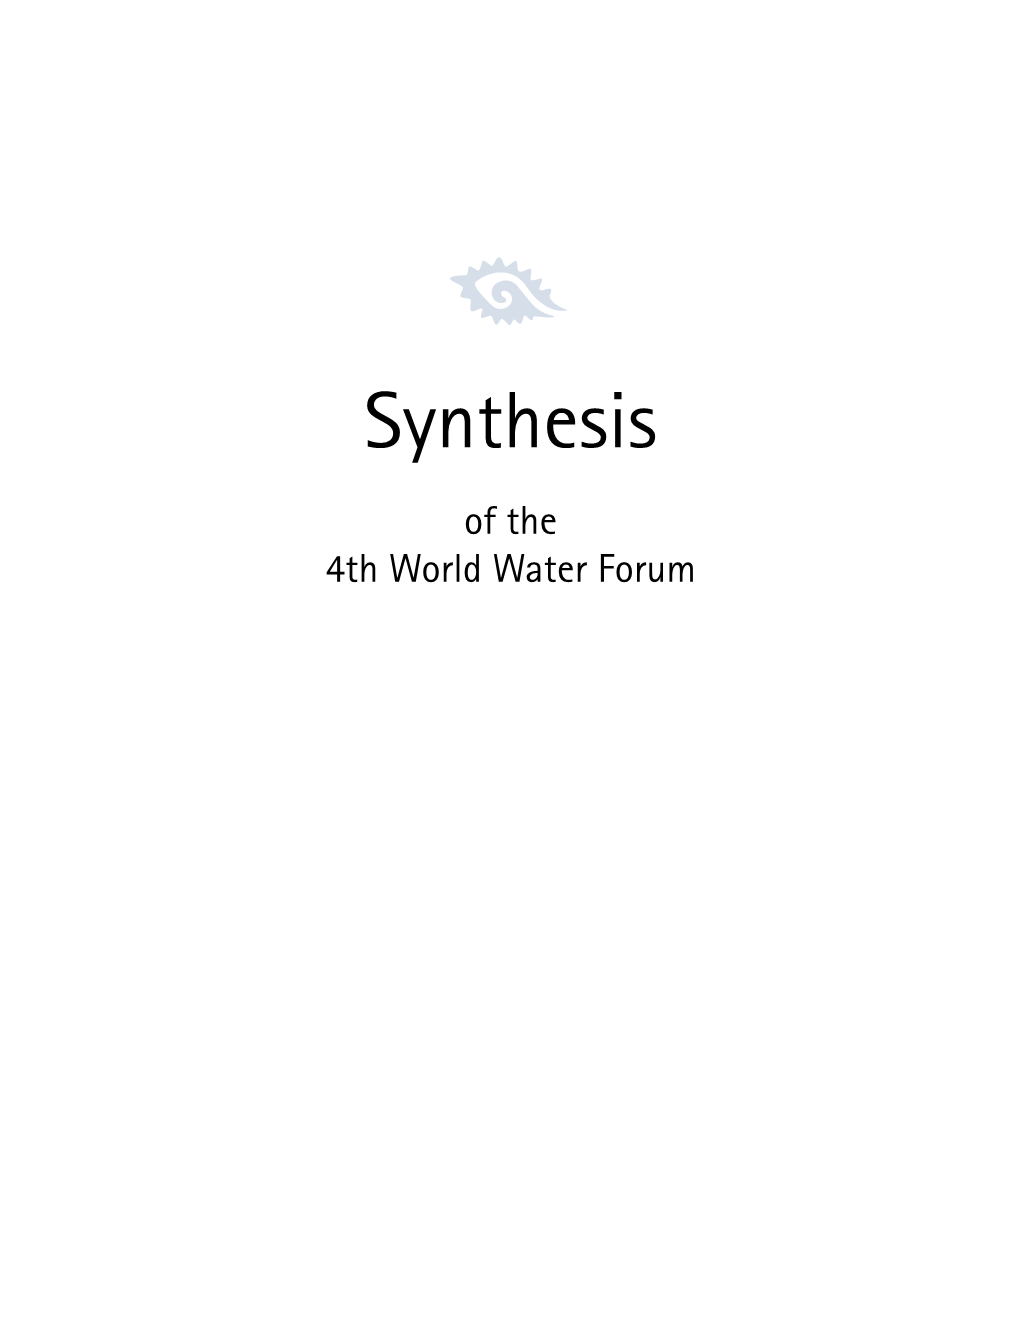 Synthesis of the 4Th World Water Forum 4TH WORLD WATER FORUM SYNTHESIS